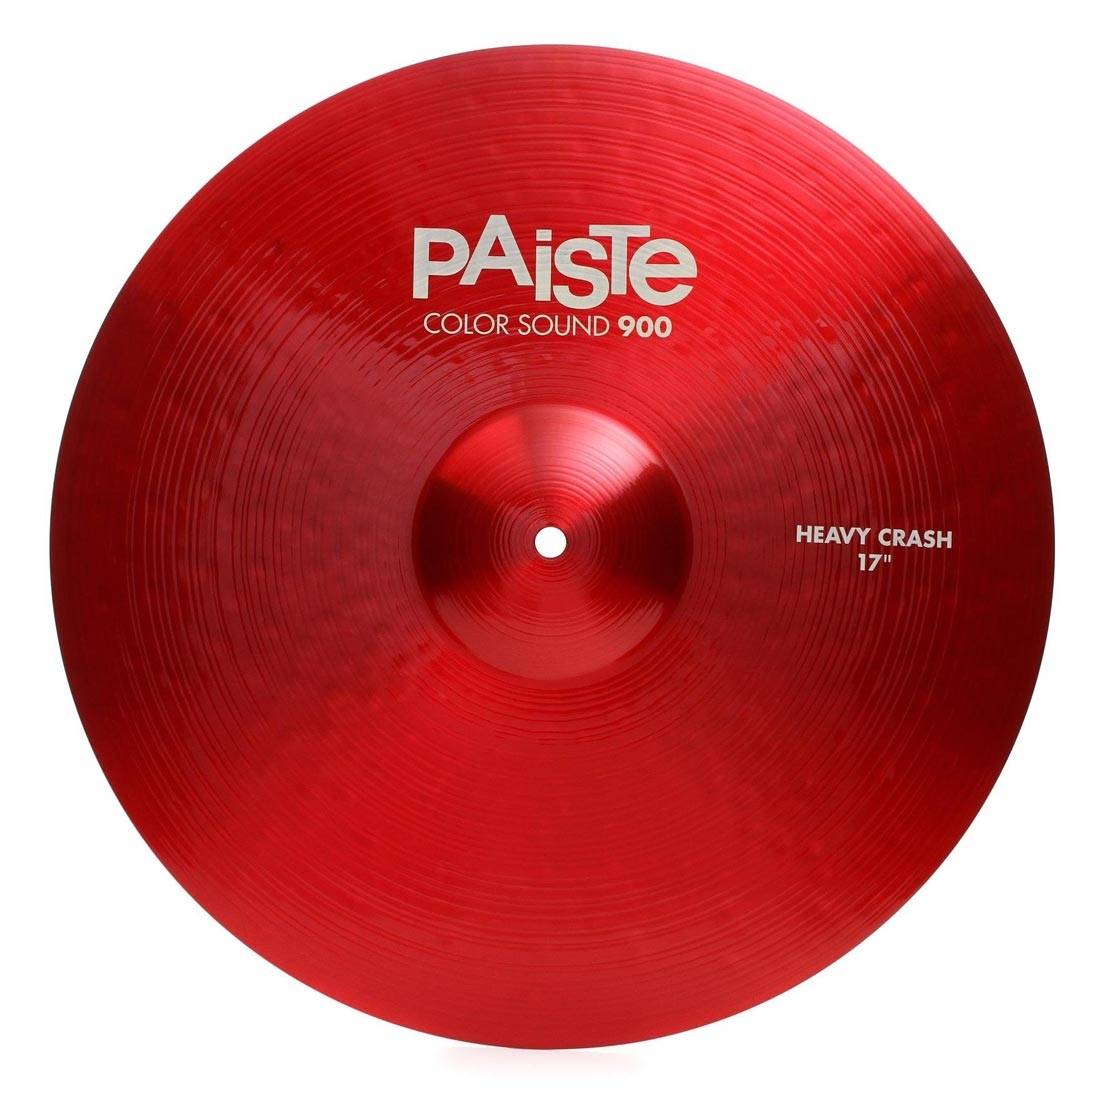 PAISTE 900 Color Sound 17'' Red Heavy Crash Cymbal